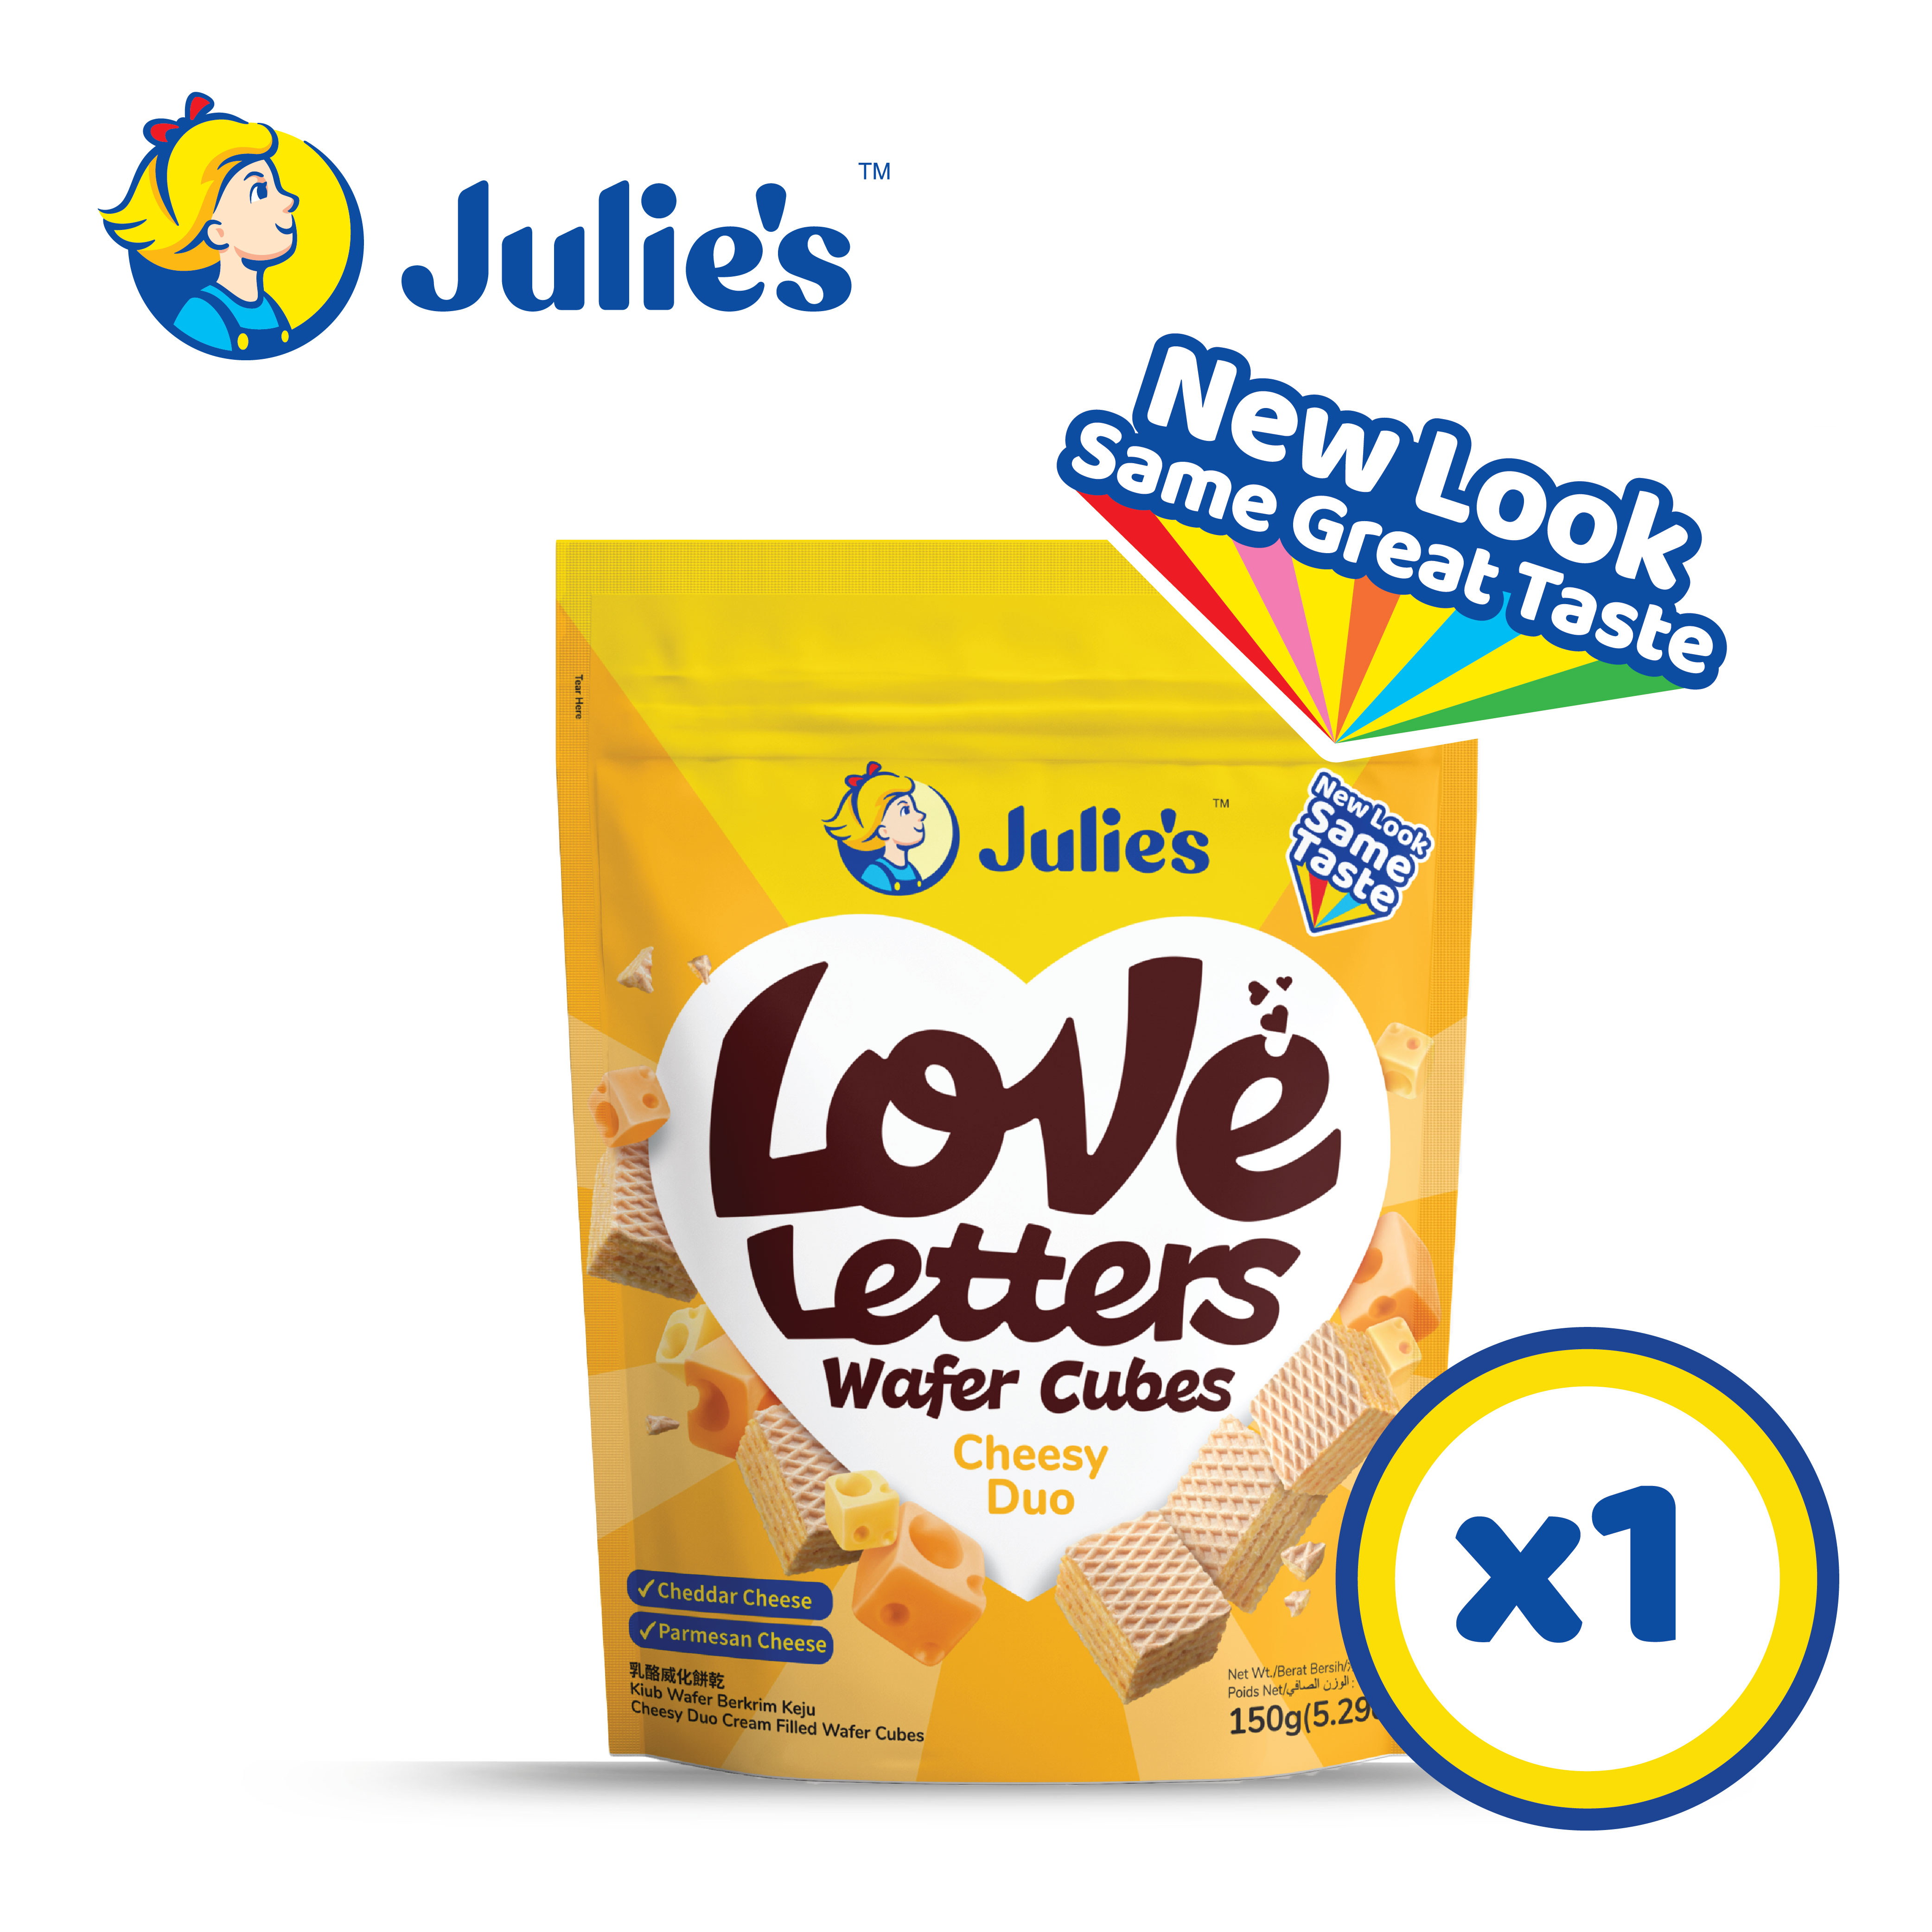 Julie's Love Letters Wafers Cheesy Duo 150g x 1 pack